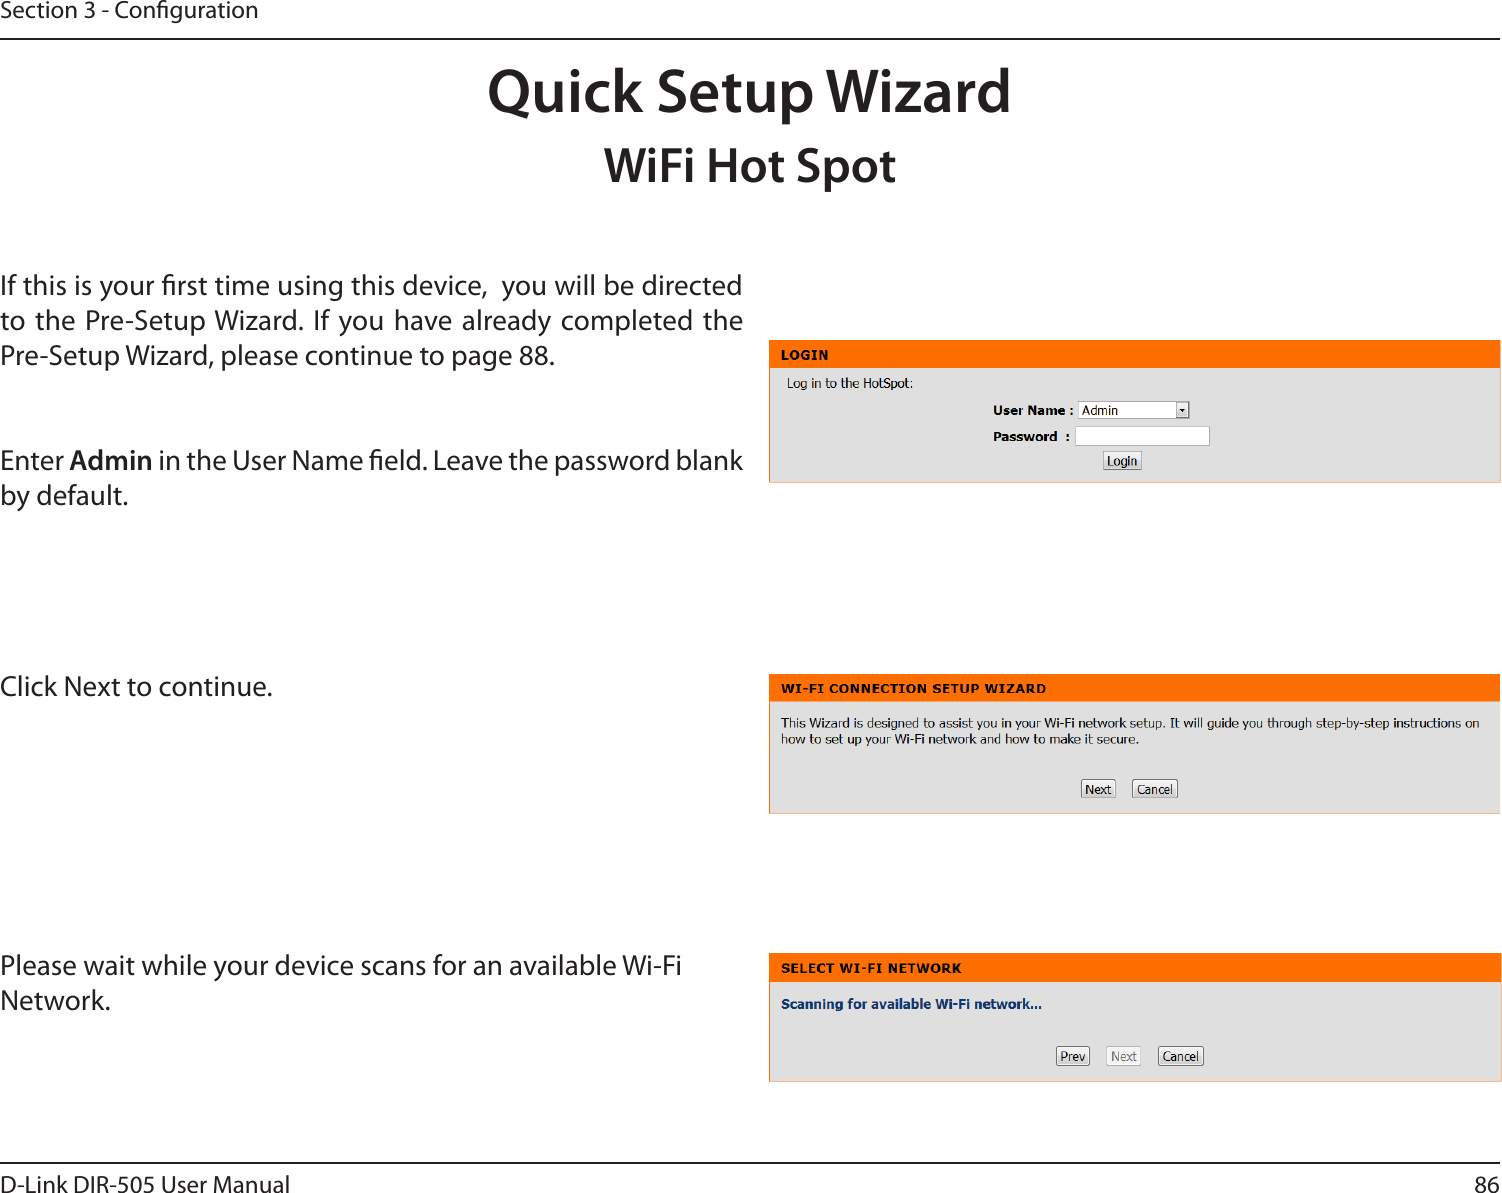 86D-Link DIR-505 User ManualSection 3 - CongurationQuick Setup WizardWiFi Hot SpotIf this is your rst time using this device,  you will be directed to the Pre-Setup Wizard. If you have already completed the Pre-Setup Wizard, please continue to page 88.Enter Admin in the User Name eld. Leave the password blank by default. Click Next to continue. Please wait while your device scans for an available Wi-Fi Network. 